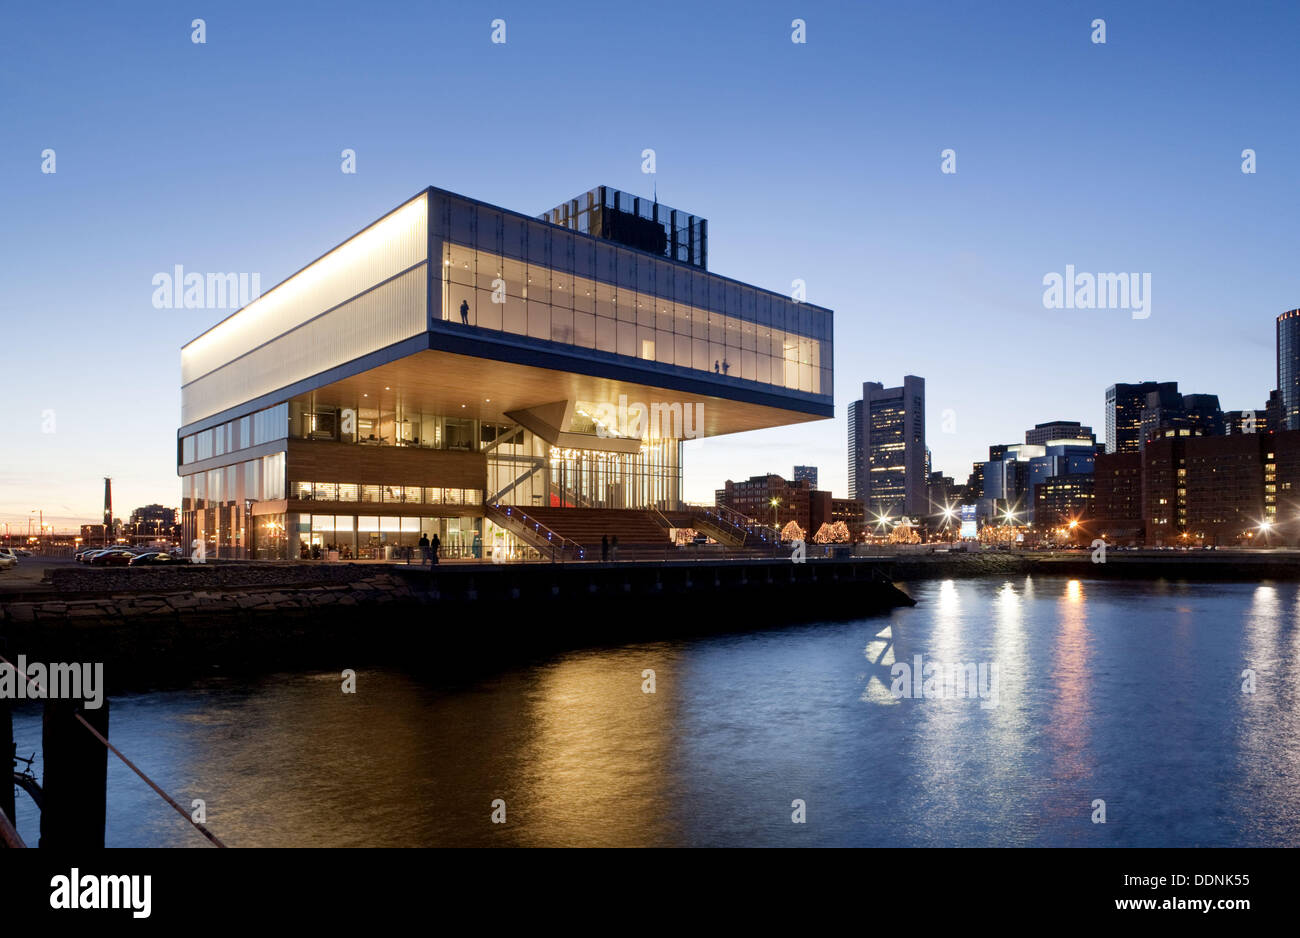 https://c8.alamy.com/comp/DDNK55/institute-of-contemporary-art-ica-by-diller-scofidio-renfro-architects-DDNK55.jpg